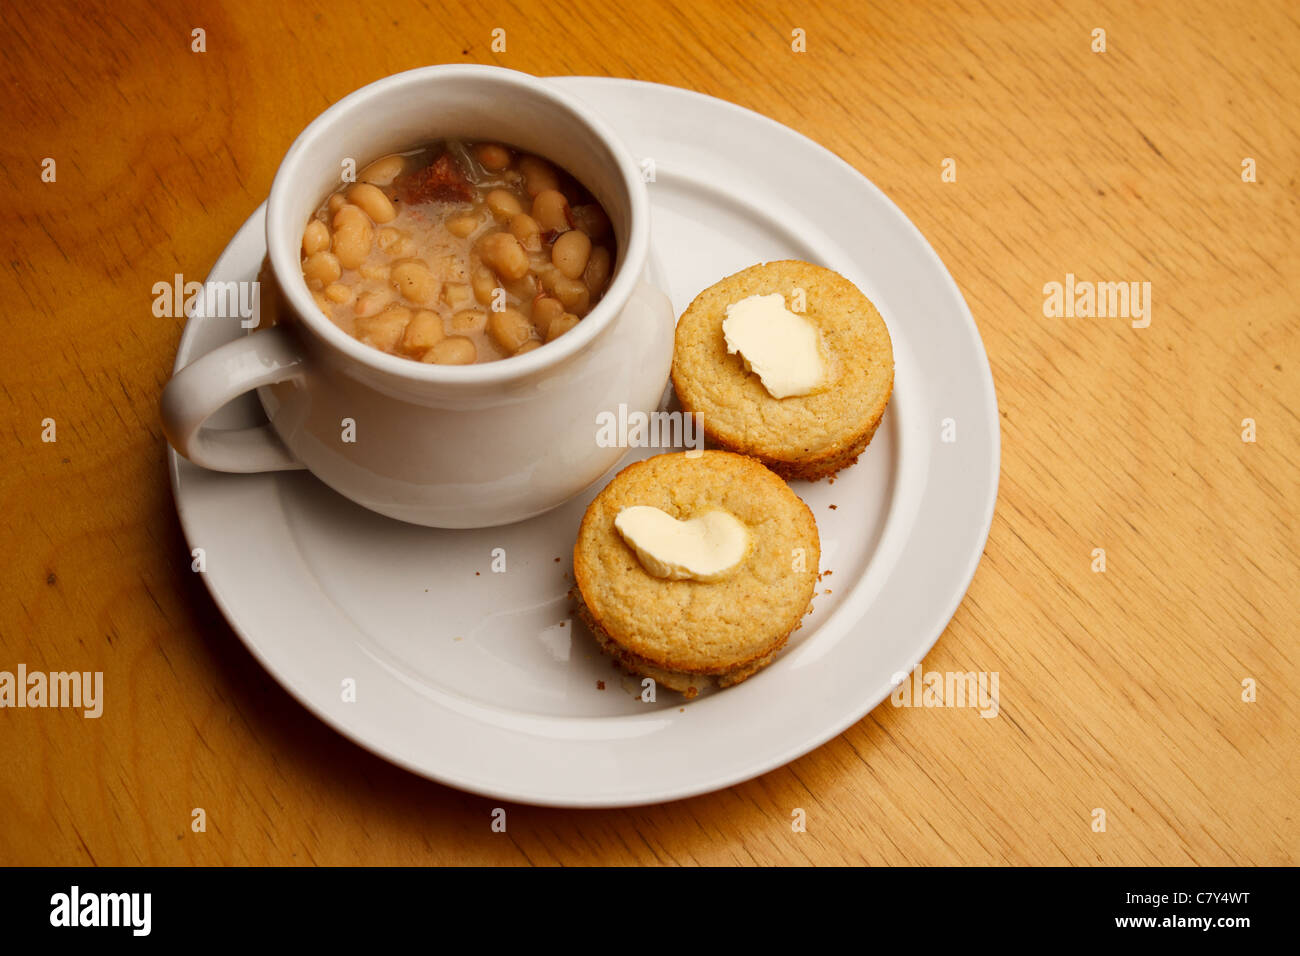 Cupcake style buttered cornbread on a white plate with bowl of bean soup Stock Photo